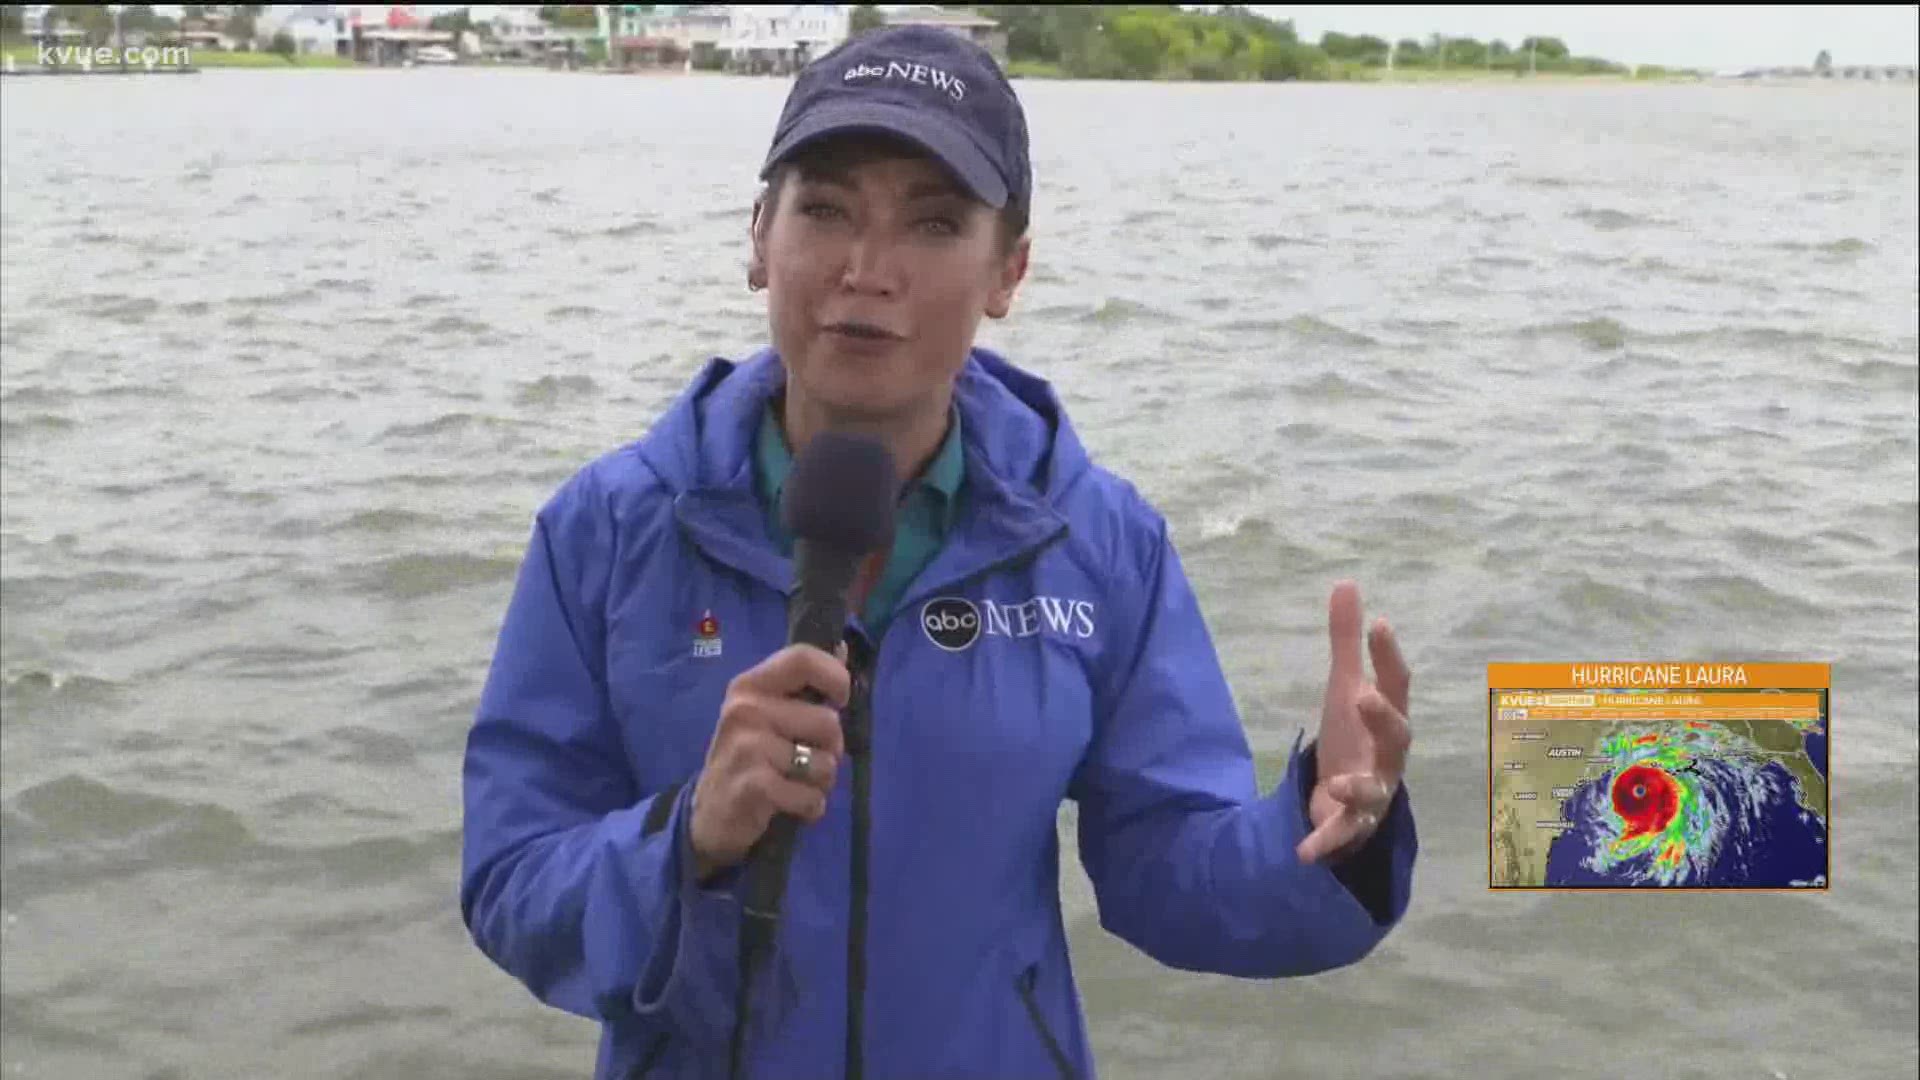 KVUE Chief Meteorologist Erika Lopez spoke with ABC Chief Meteorologist Ginger Zee about Hurricane Laura.